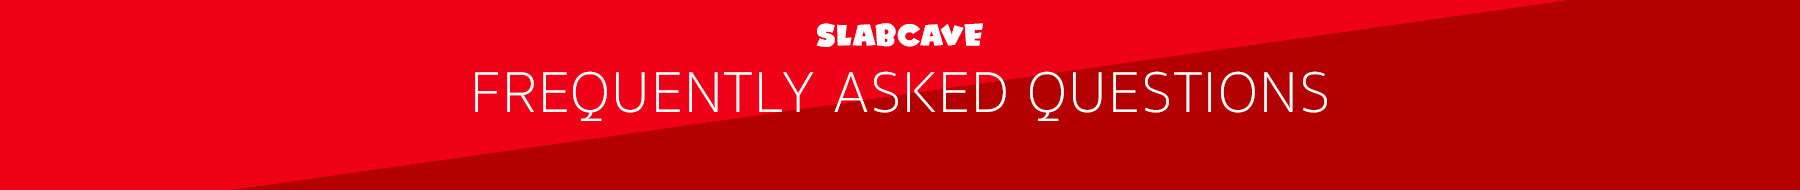 SlabCave Frequently Asked Questions